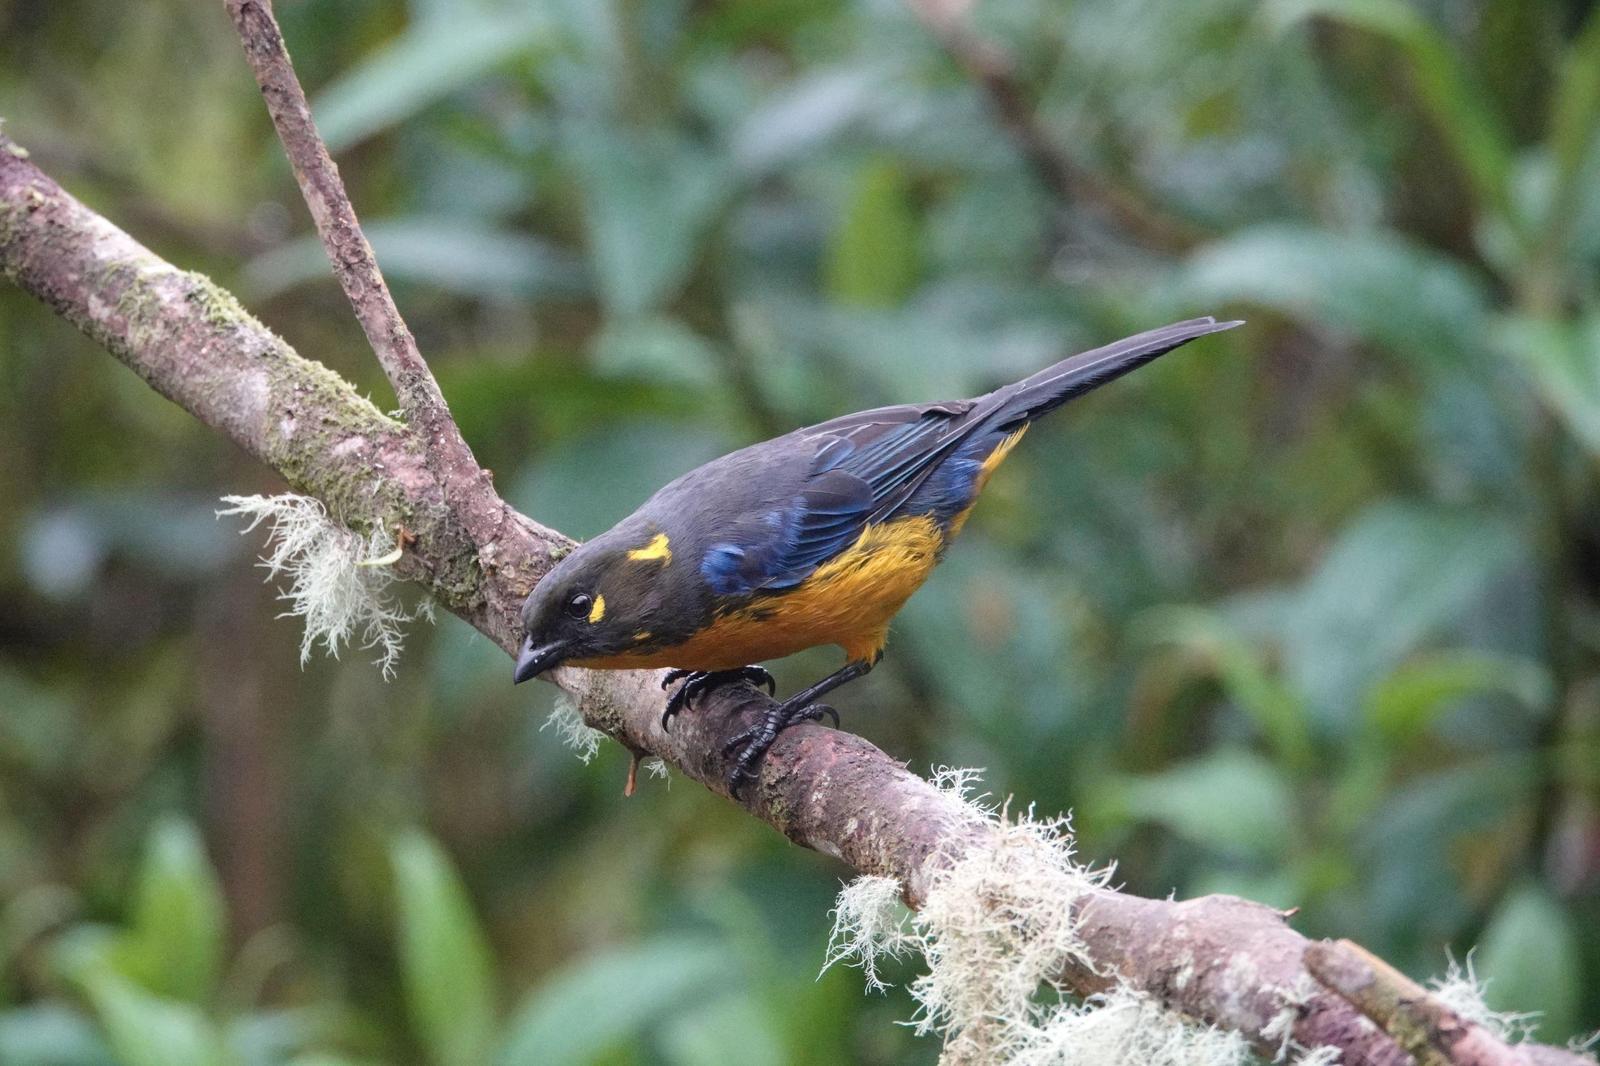 Lacrimose Mountain-Tanager Photo by Bonnie Clarfield-Bylin